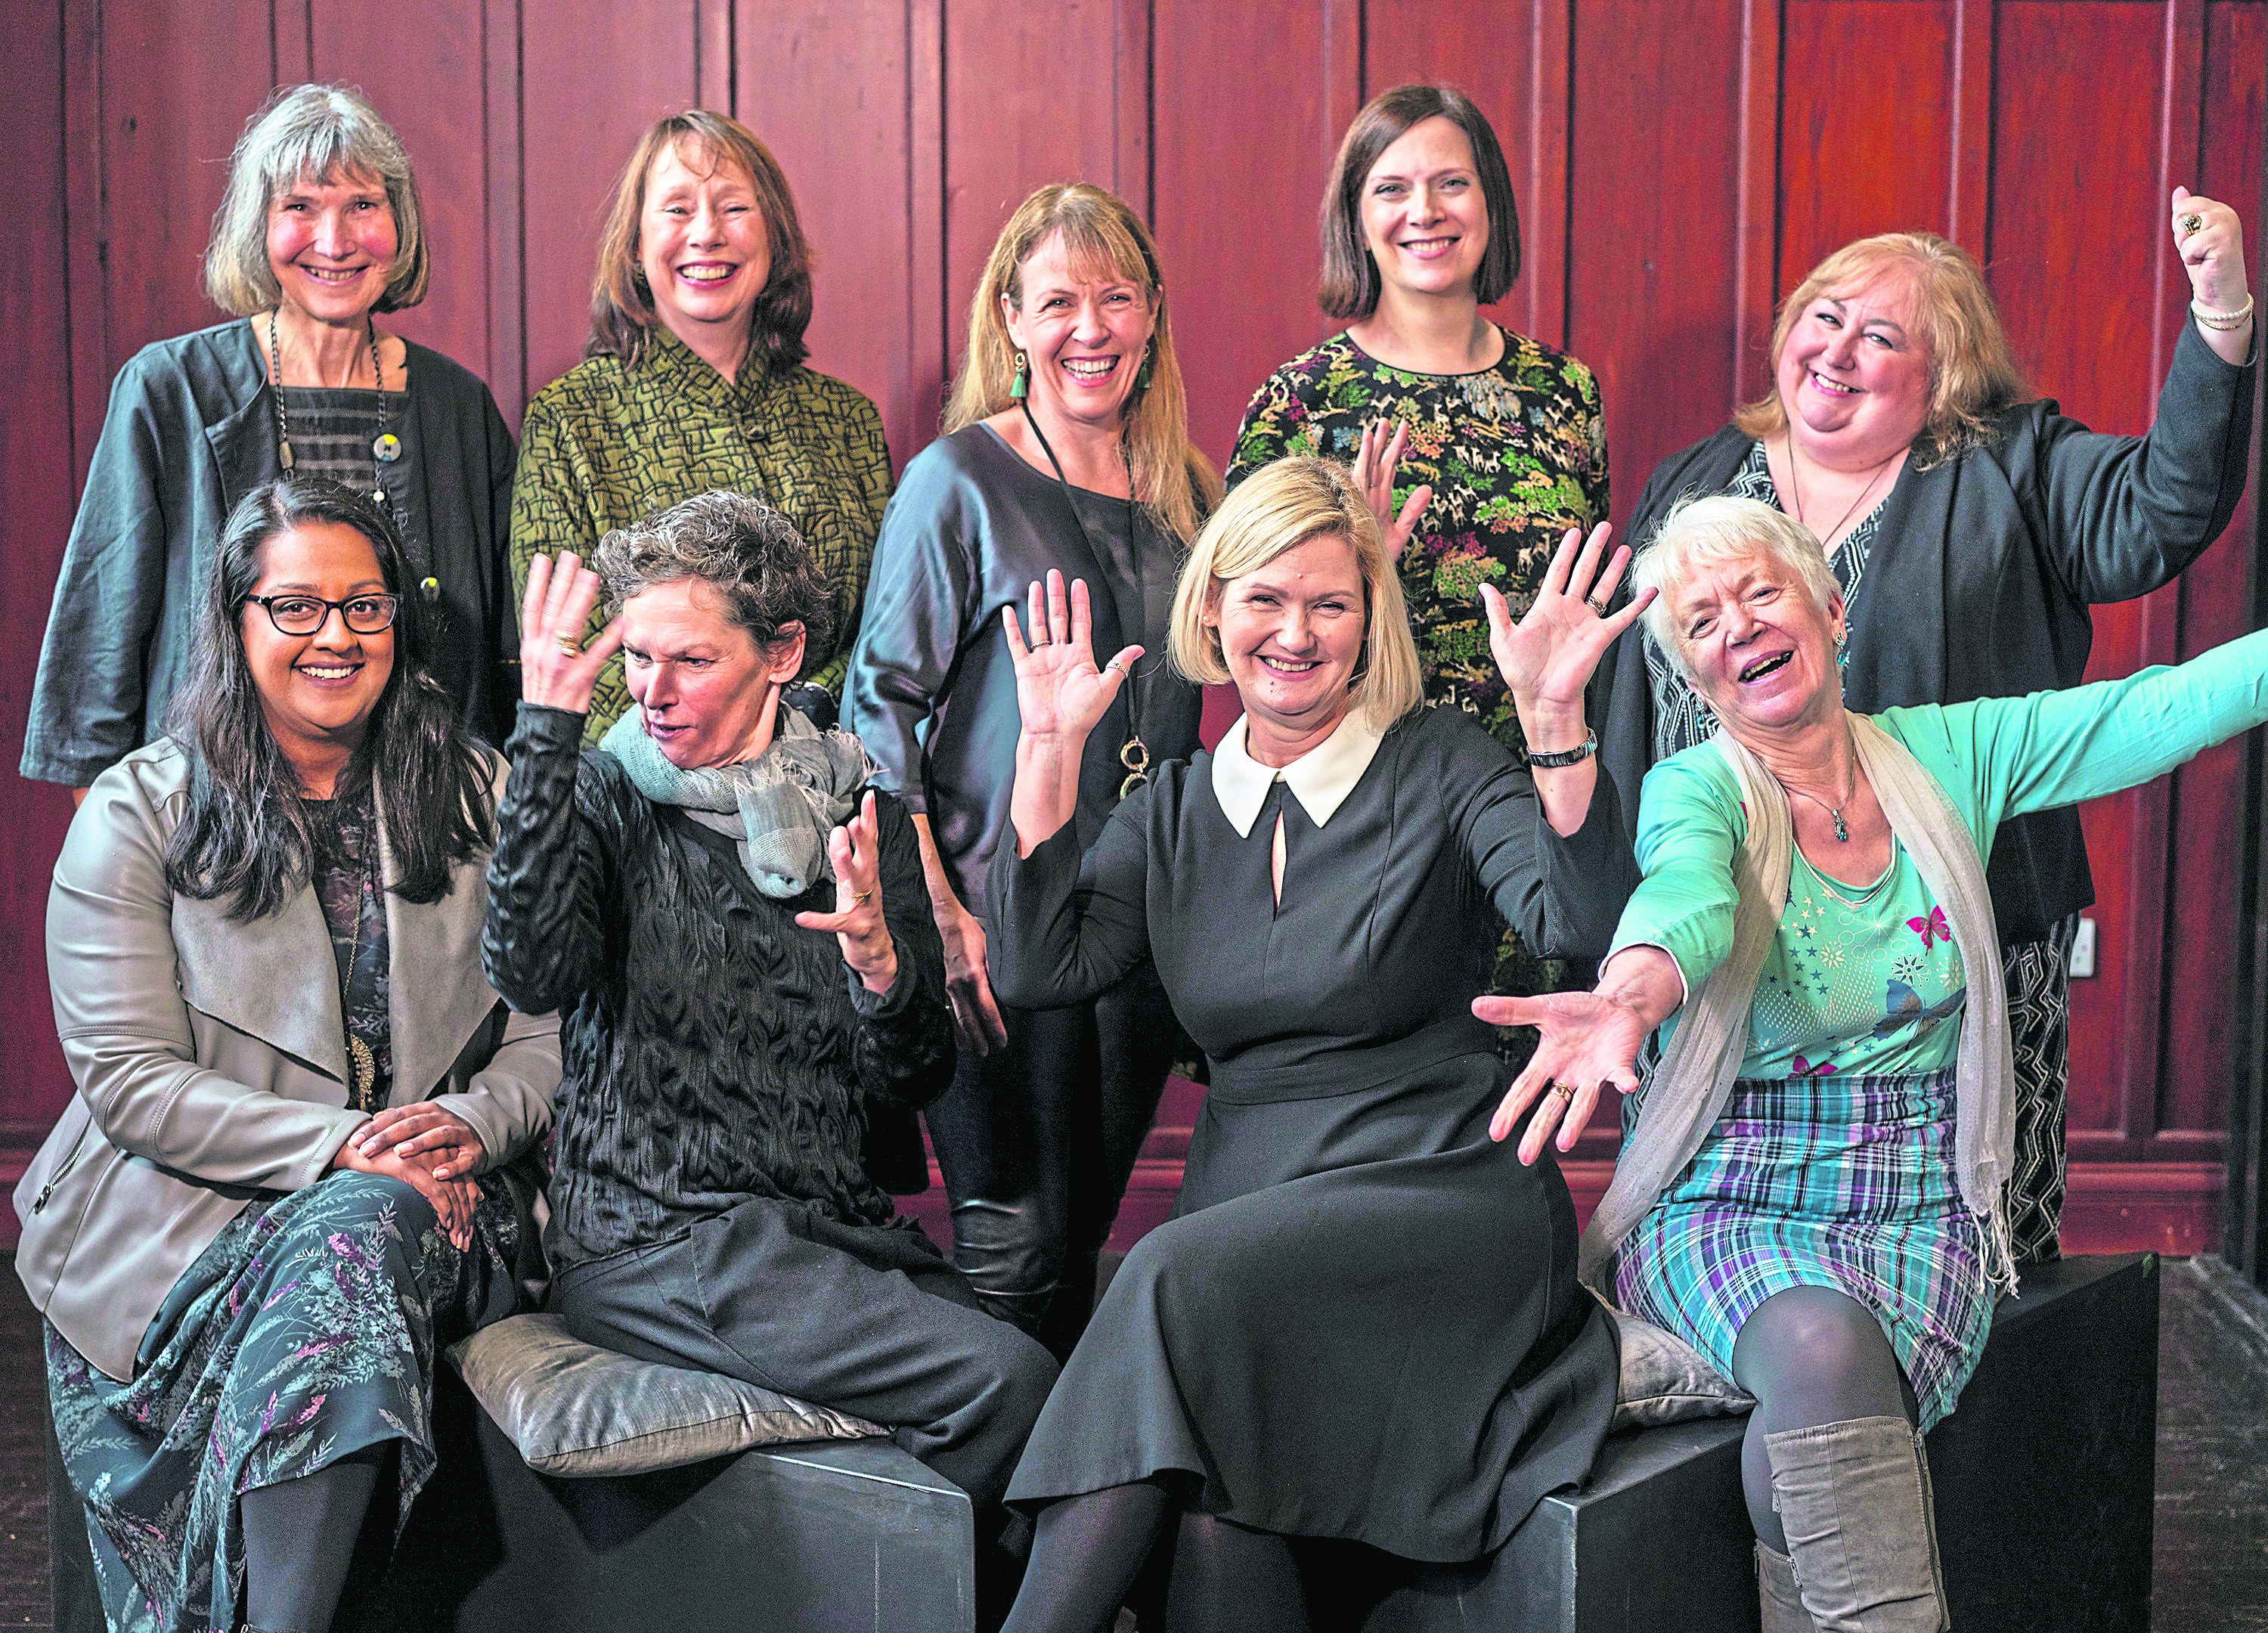 Special ceremony: Back row, from left, Sarah Wanless, Jenny Brown, Karyn McCluskey, Maureen Beattie and Beth Morrison. Front row, from left, Talat Yaqoob, Janice Parker, Rosemary Ward and Isabel McCue